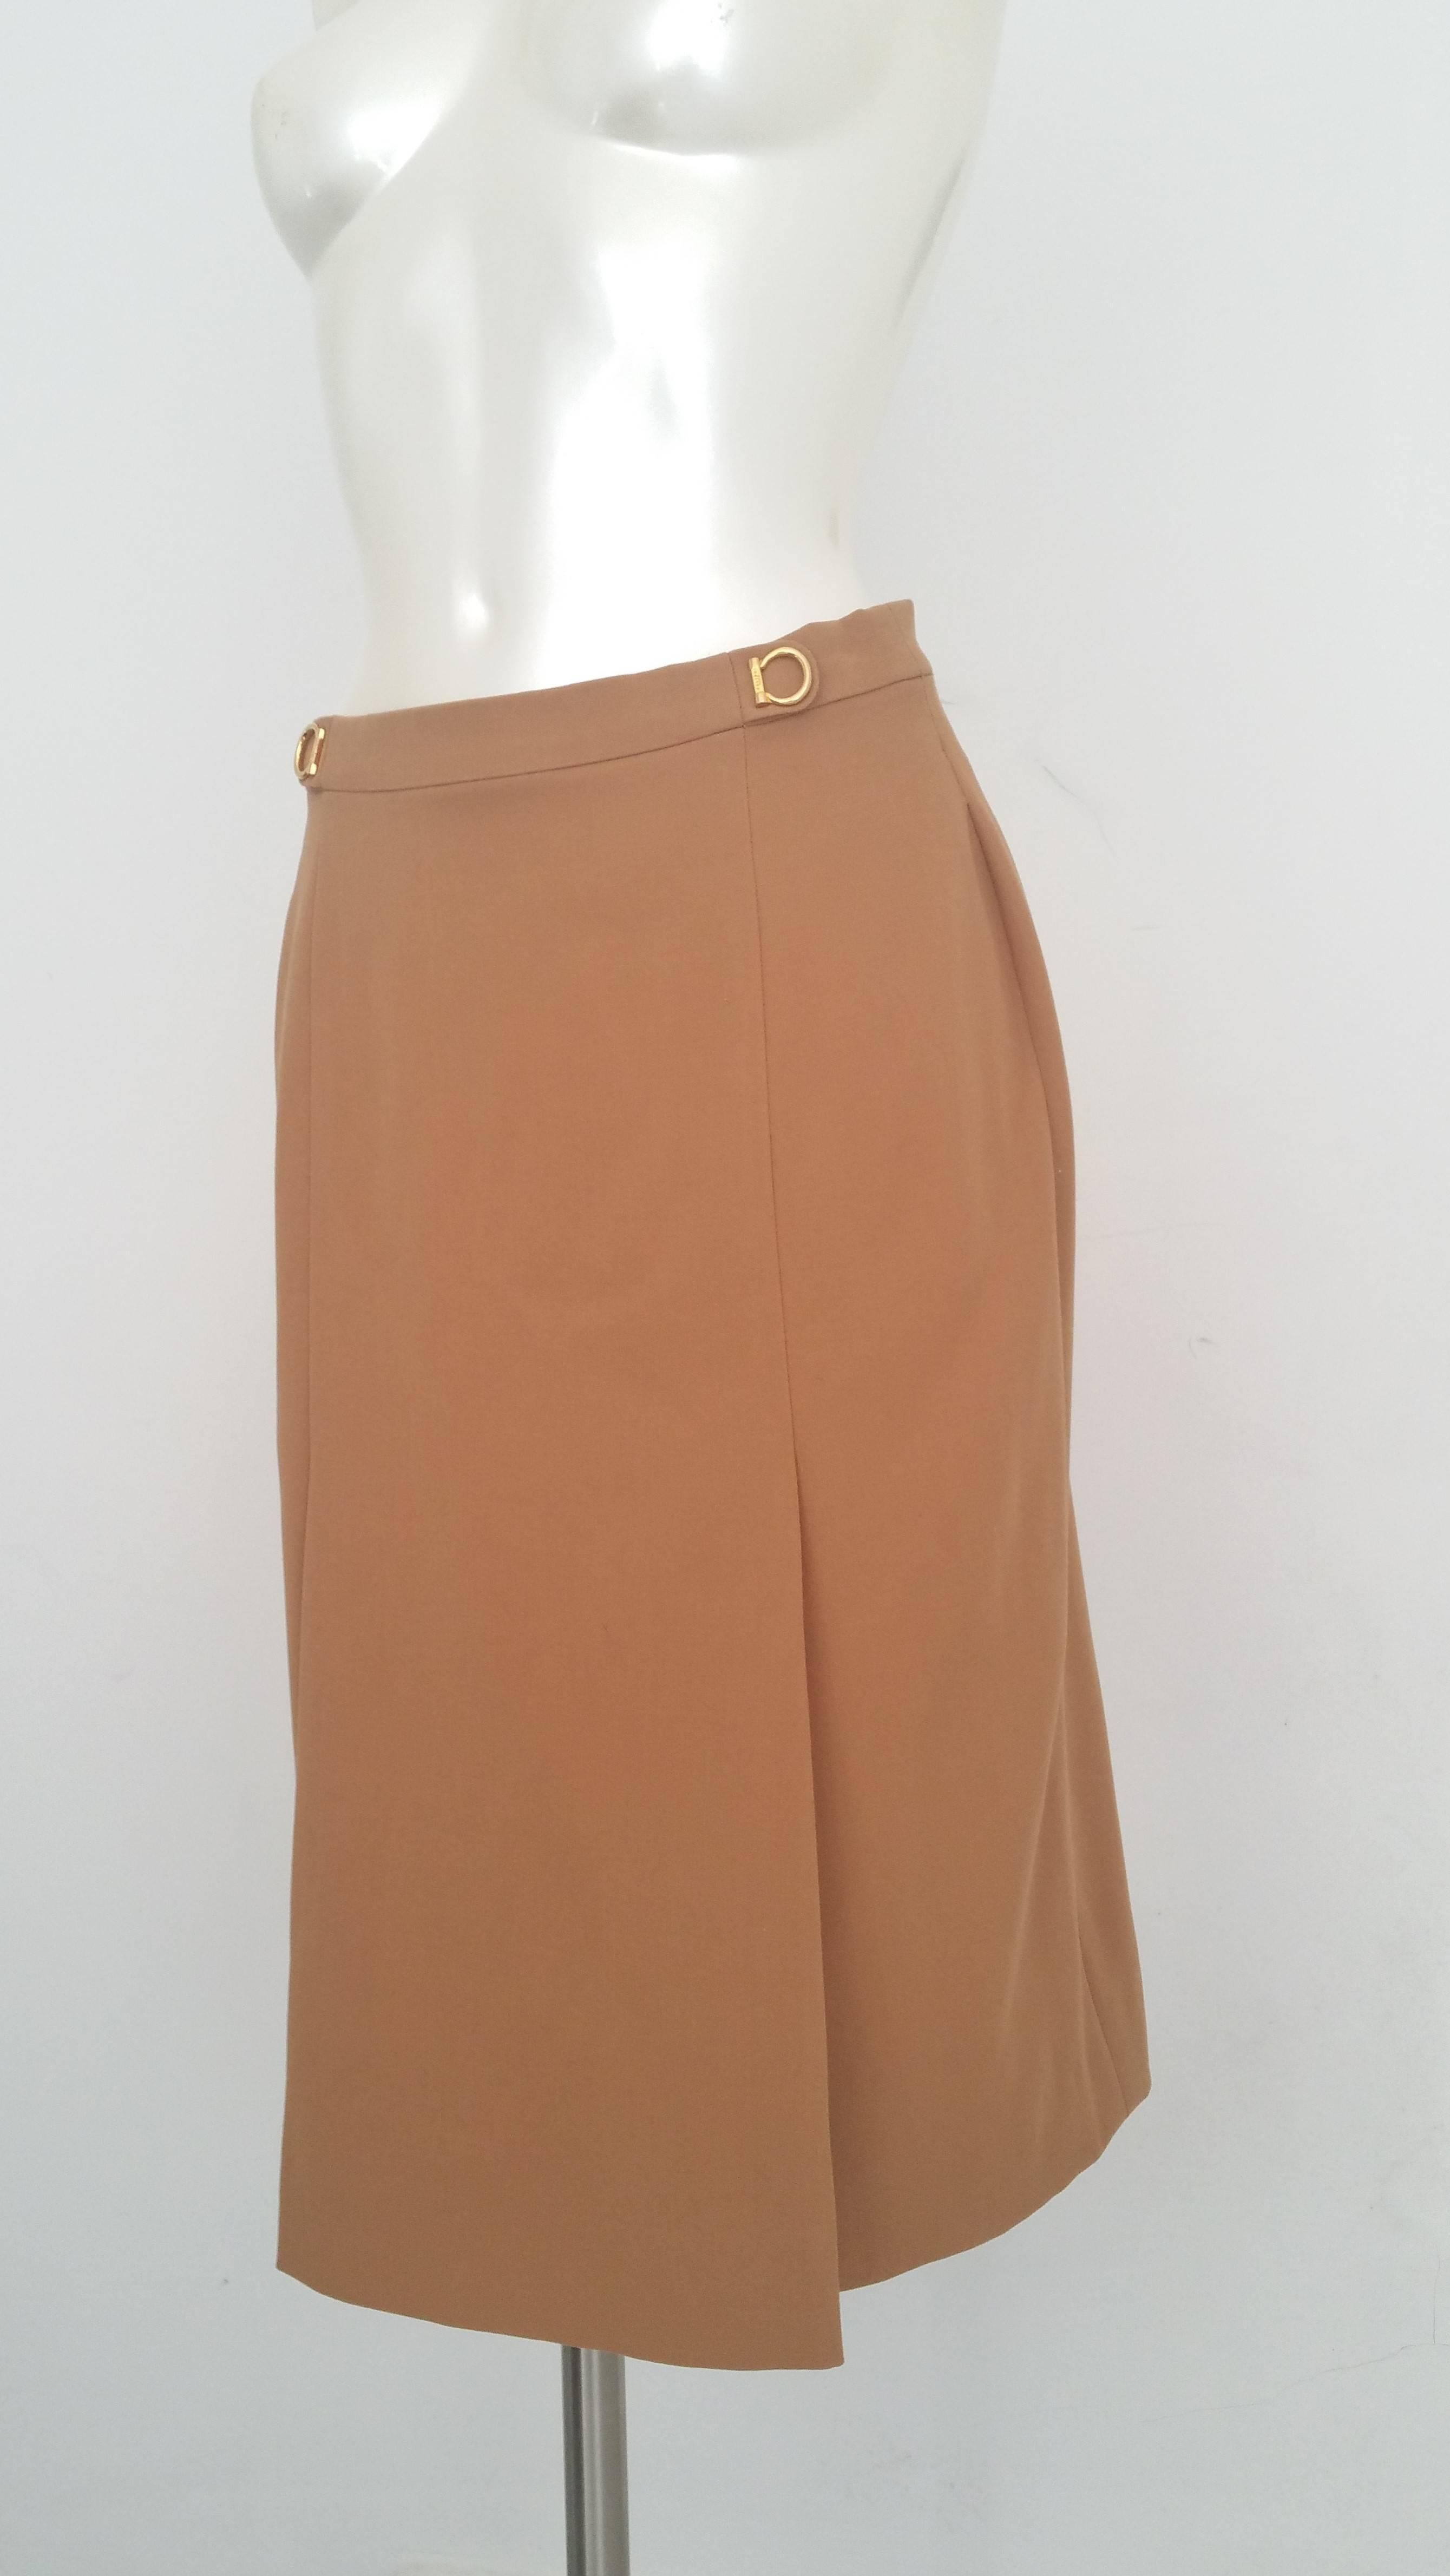 1990s Celine brown skirt 

totally made in france with gold hardware

Compositions:

100% Wool

Lining: 60 % acetate 40% bemberg